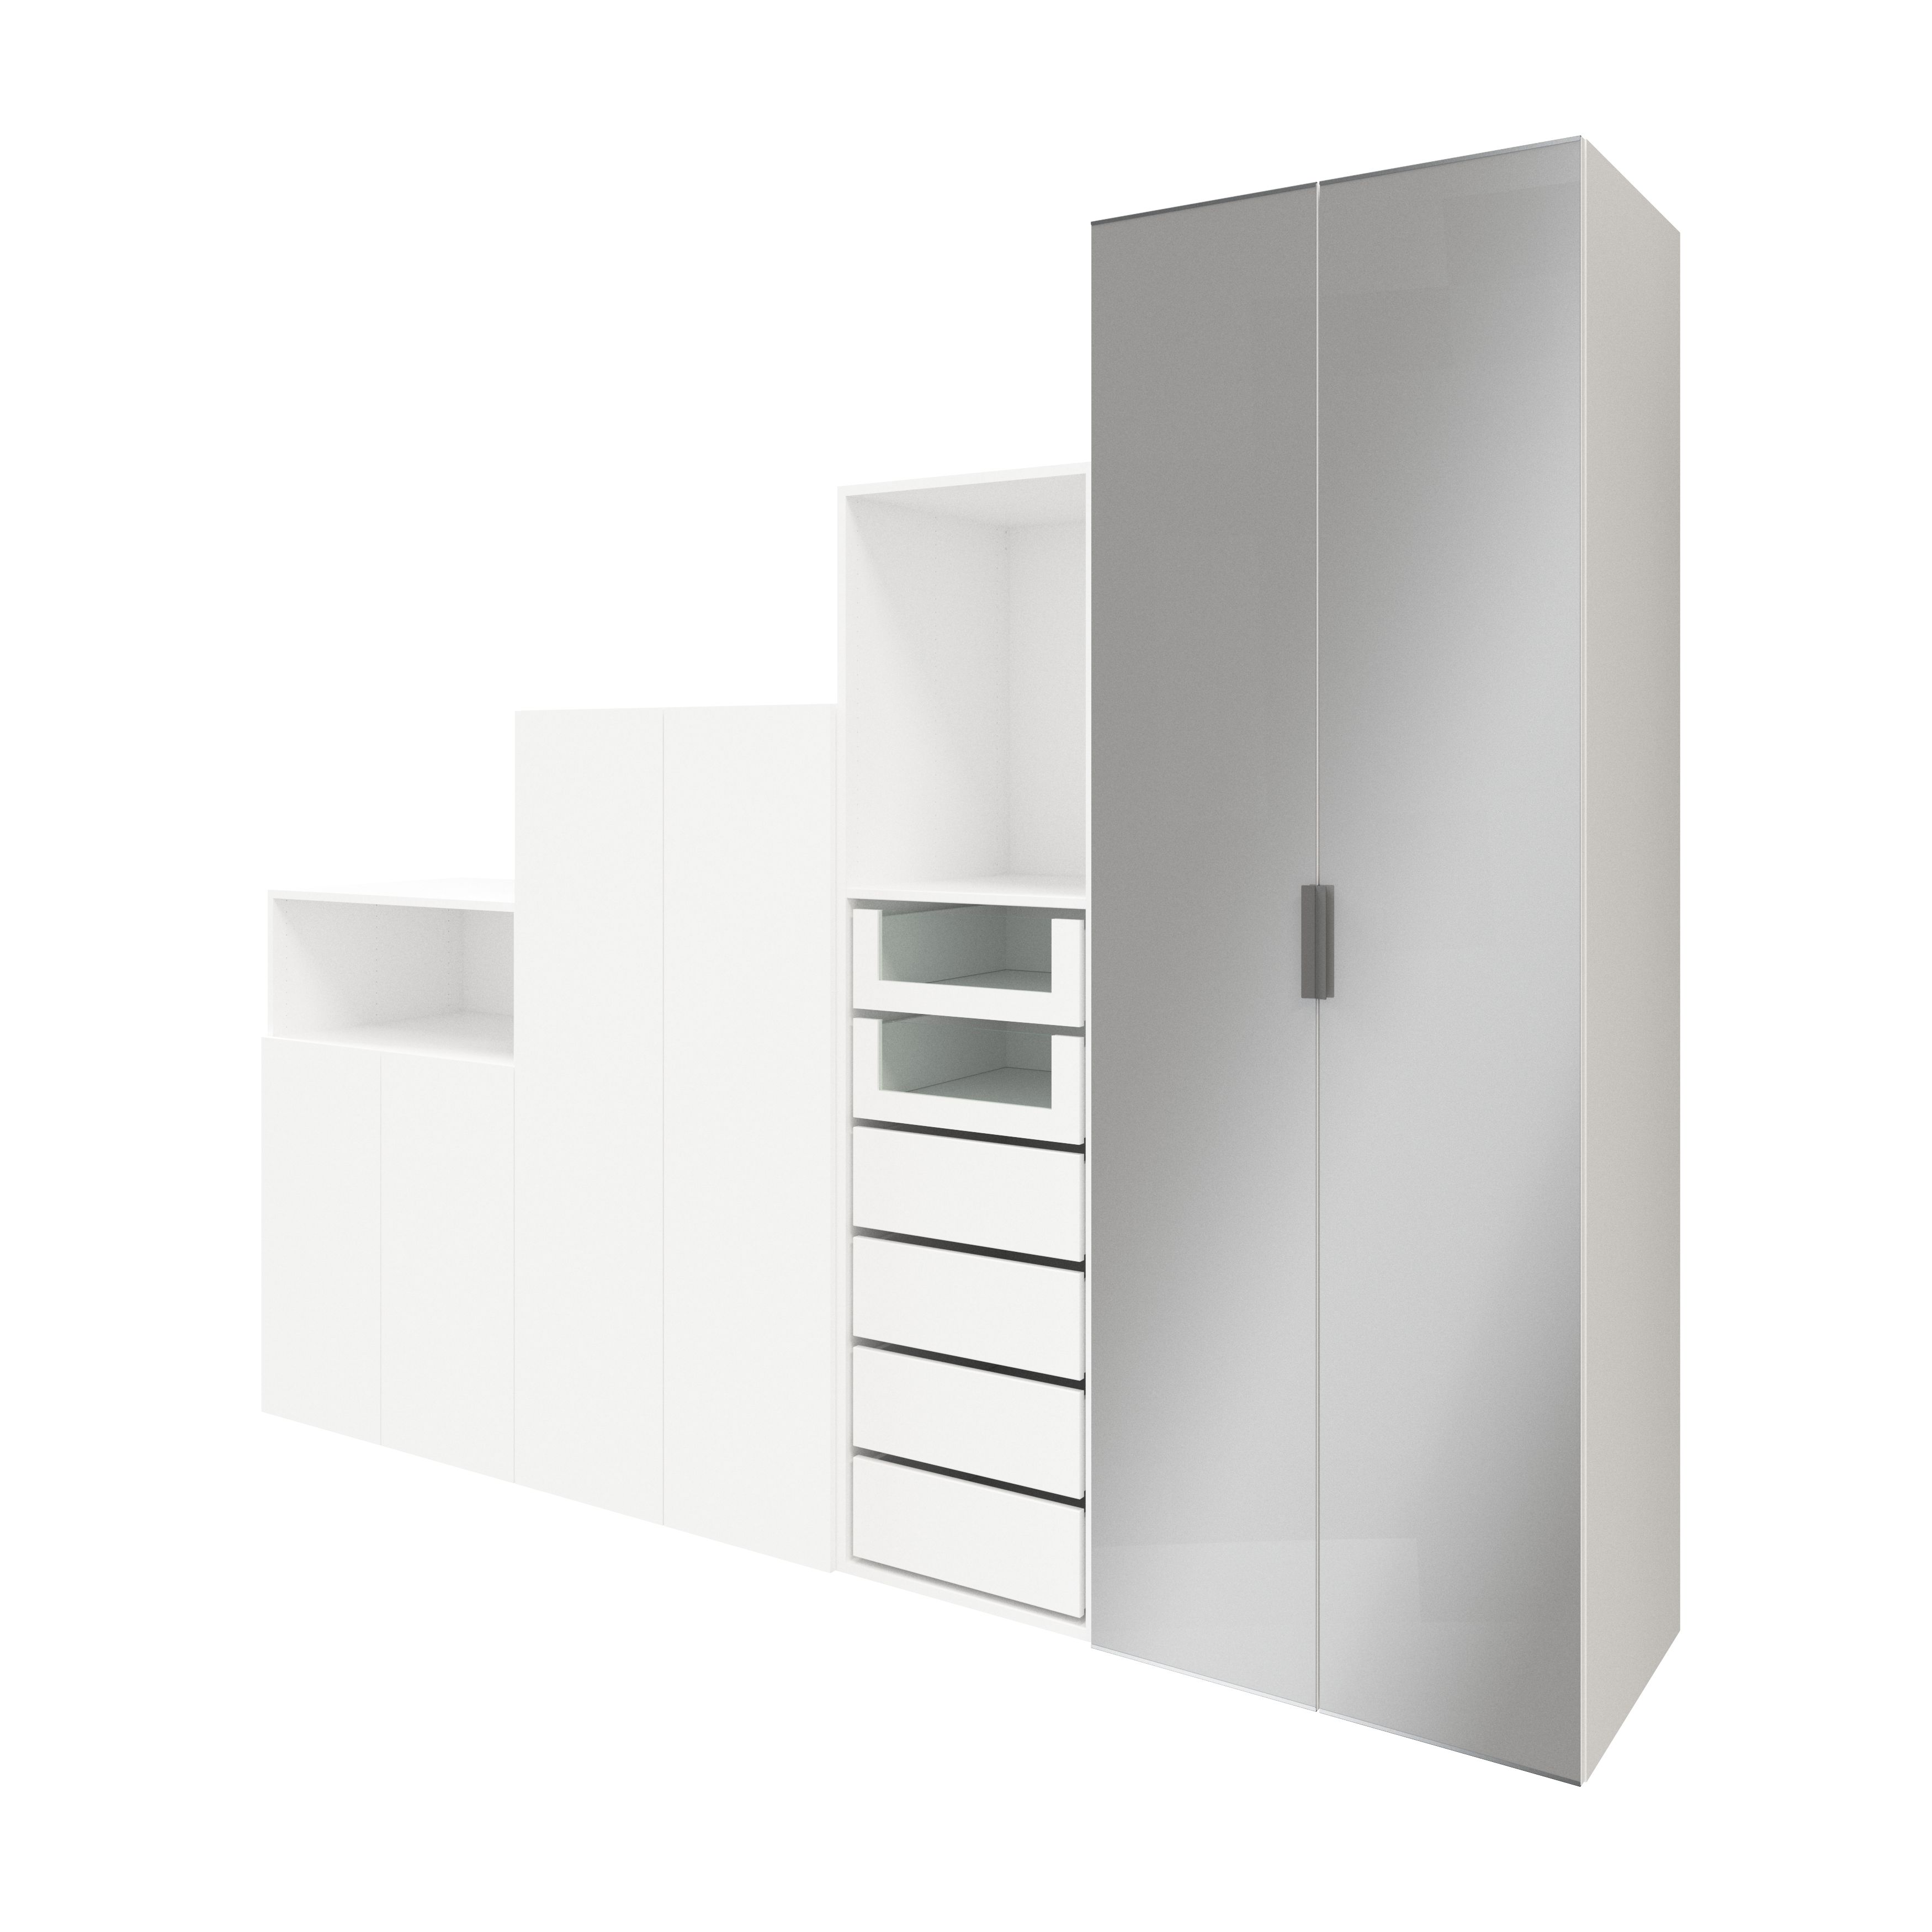 GoodHome Atomia Freestanding White Wardrobe, clothing & shoes organiser (H)2250mm (W)2750mm (D)580mm